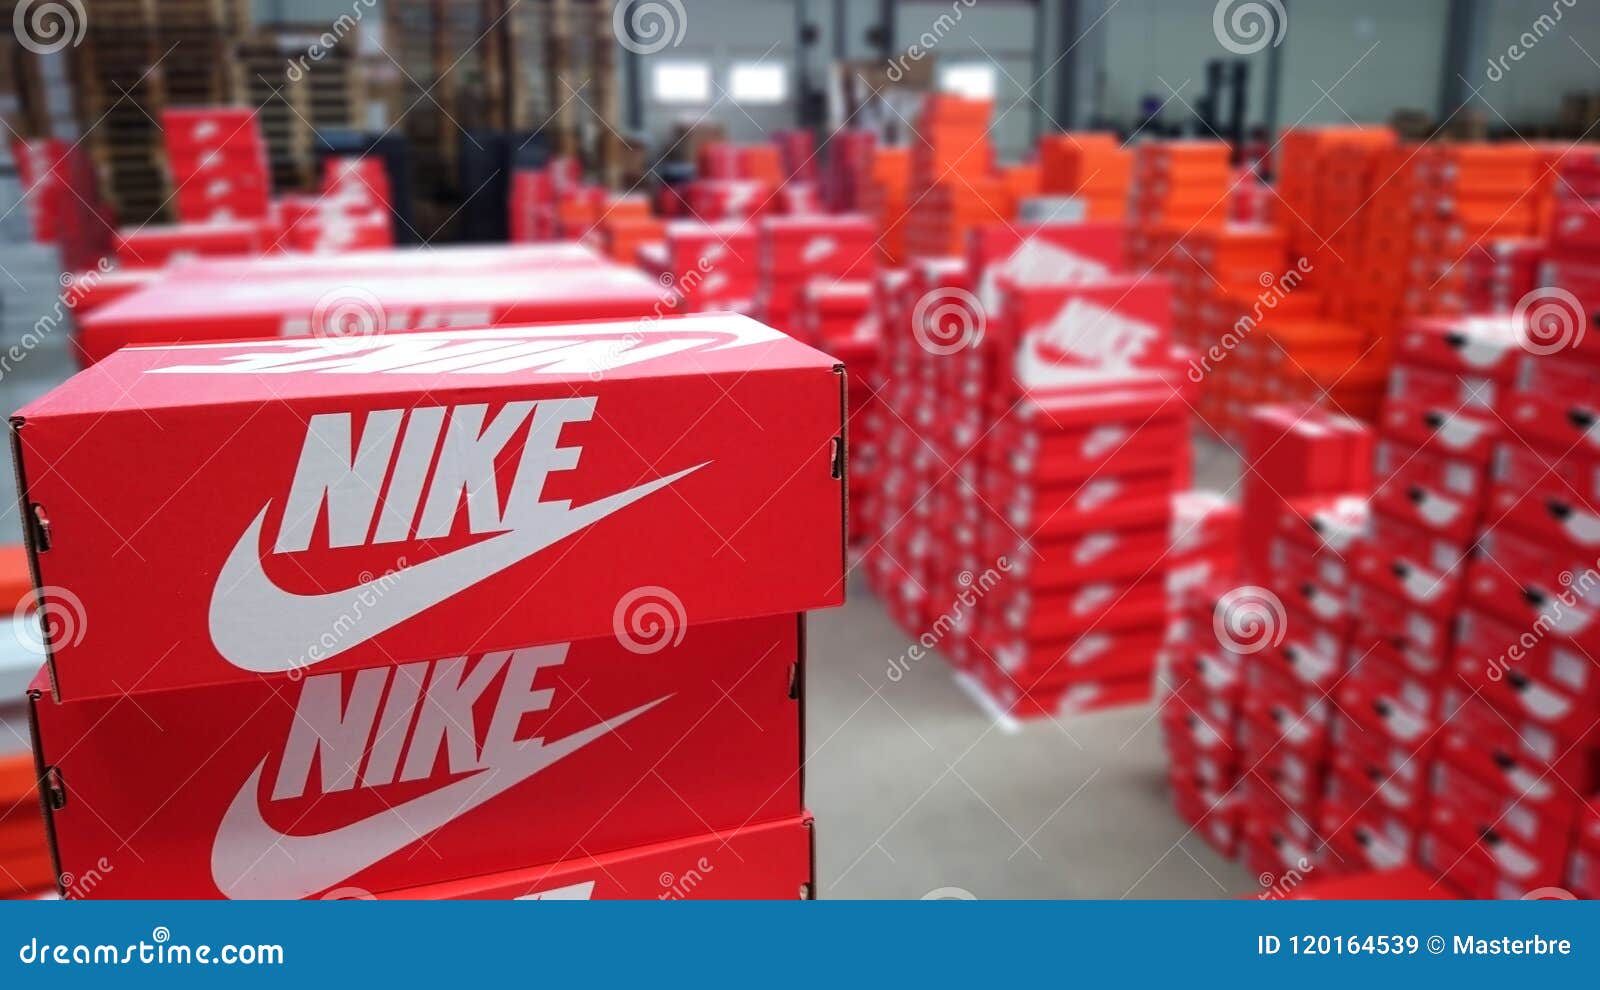 NIke Sneakers Boxes In Warehouse 